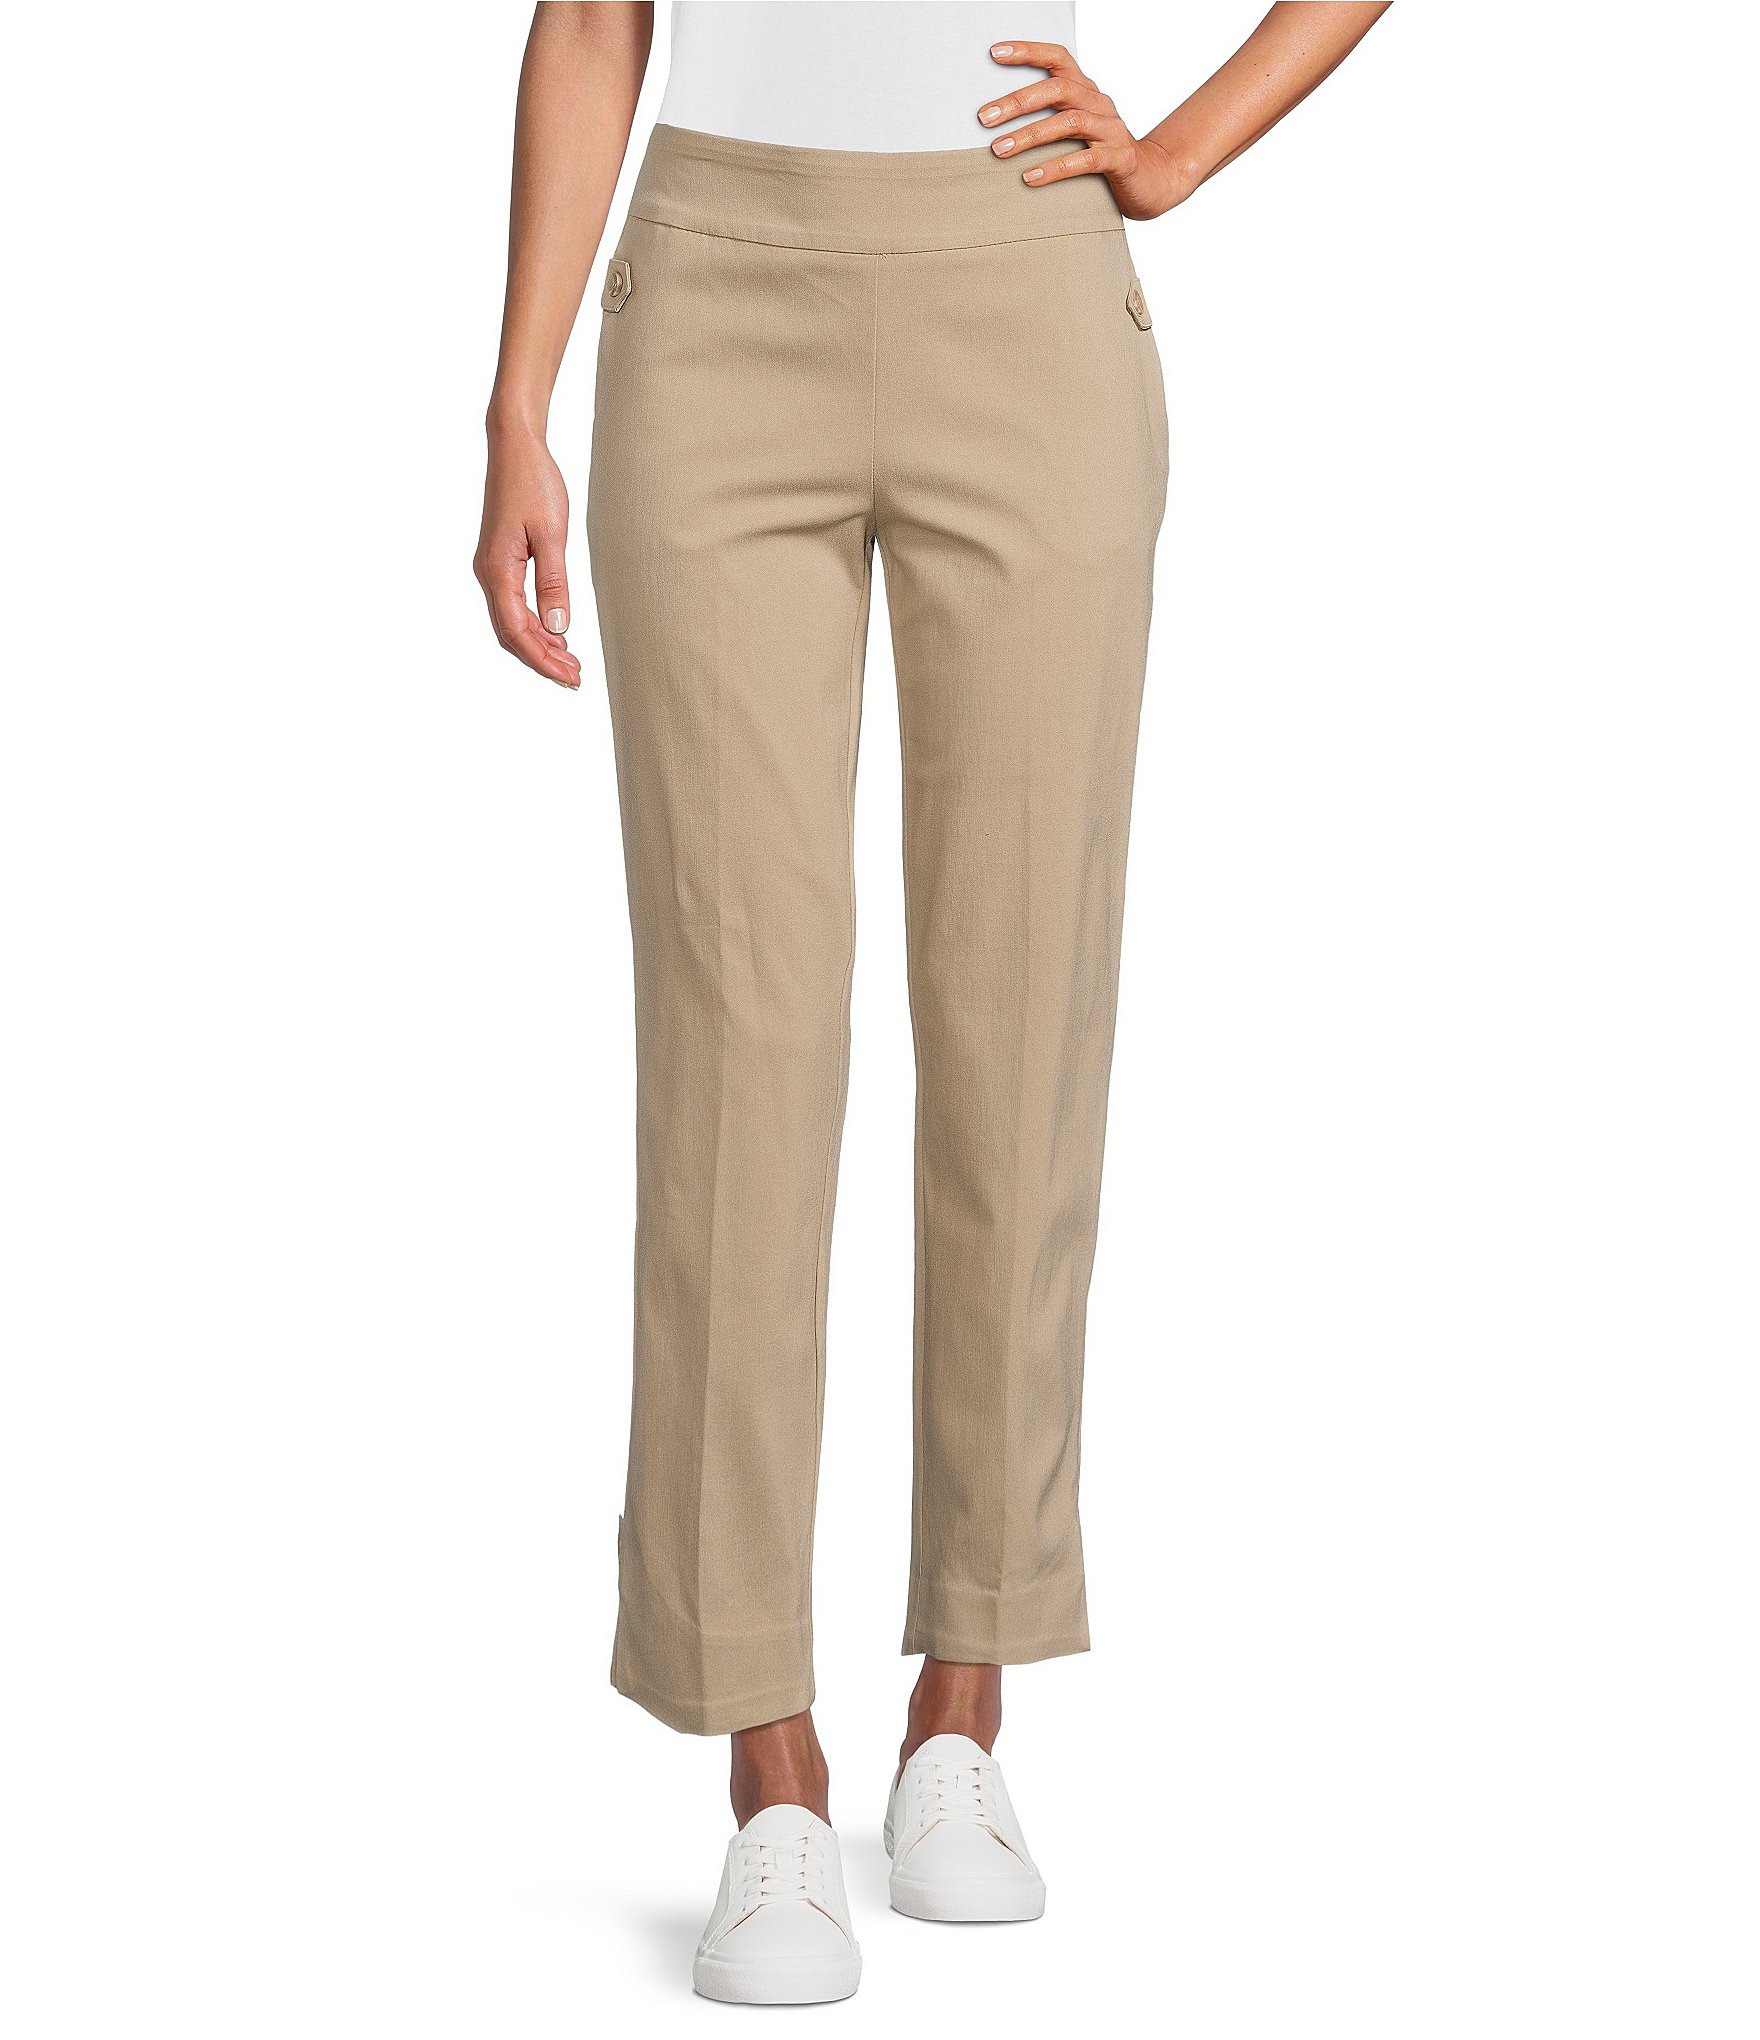 Allison Daley Button Tab Pocket Pull-On Straight Leg Ankle Pants ...